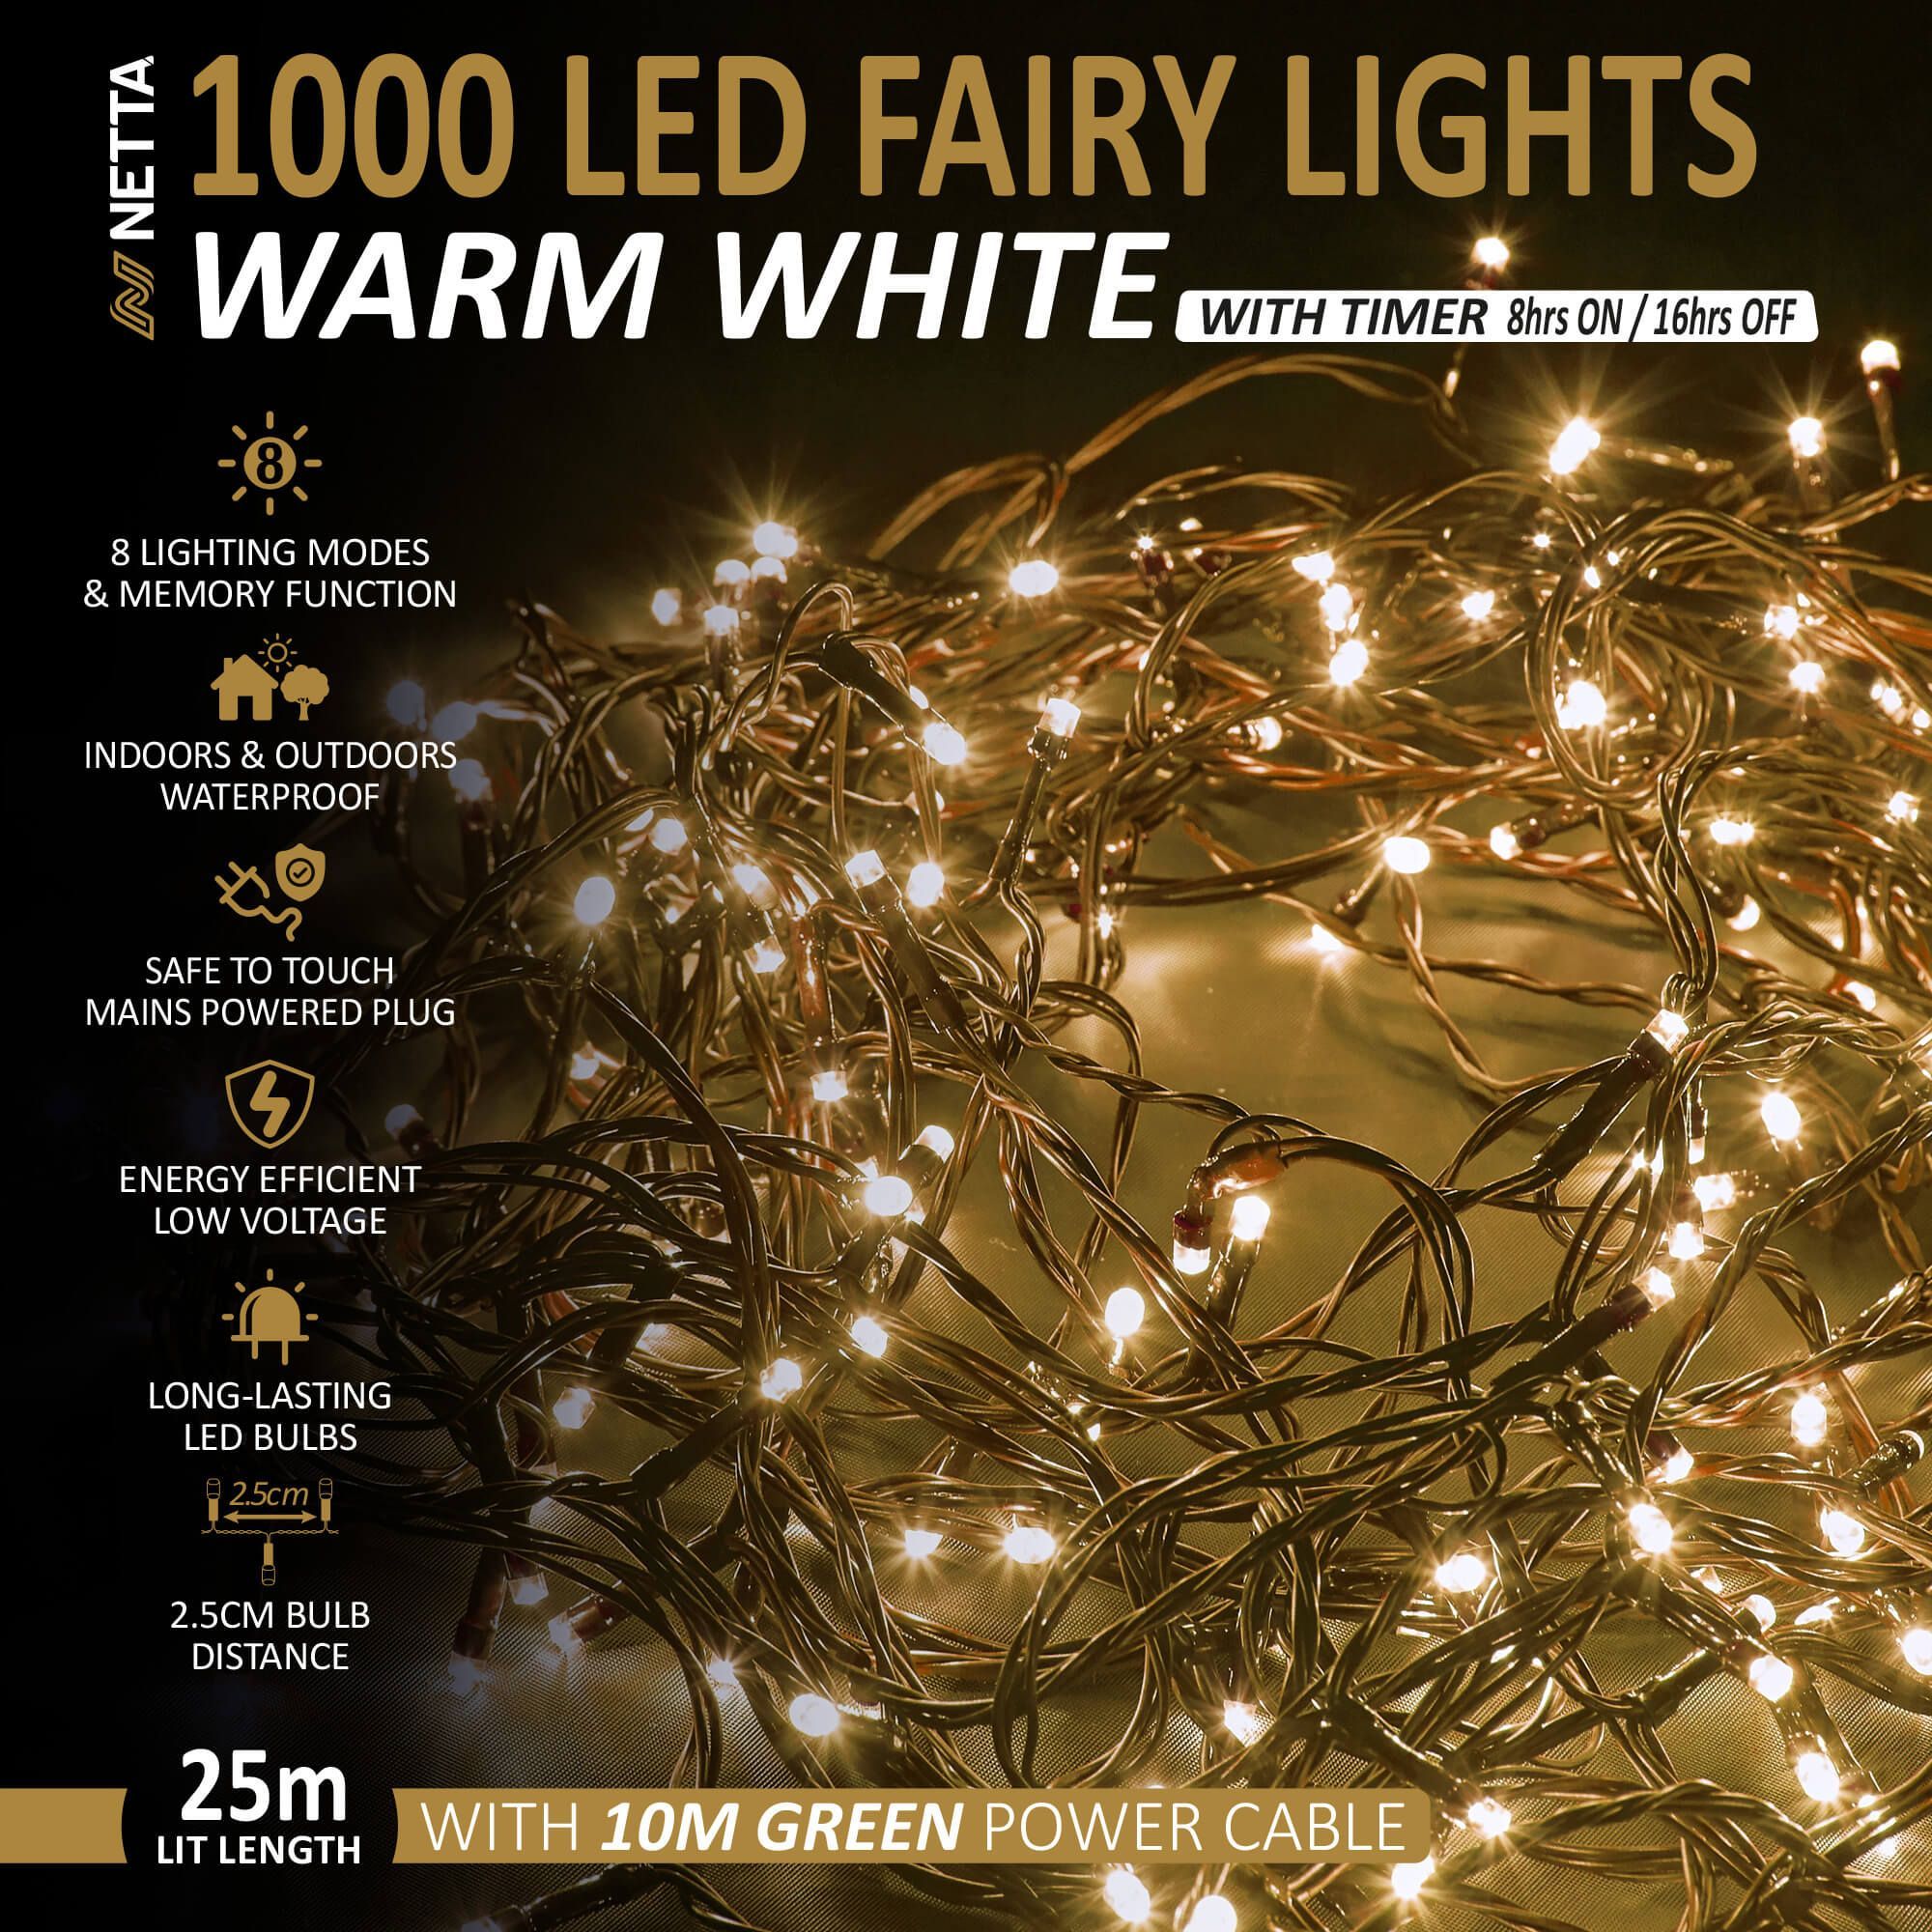 NETTA 1000 LED Fairy Close-set String Lights 25M Christmas Tree Lights Green Cable - Warm White